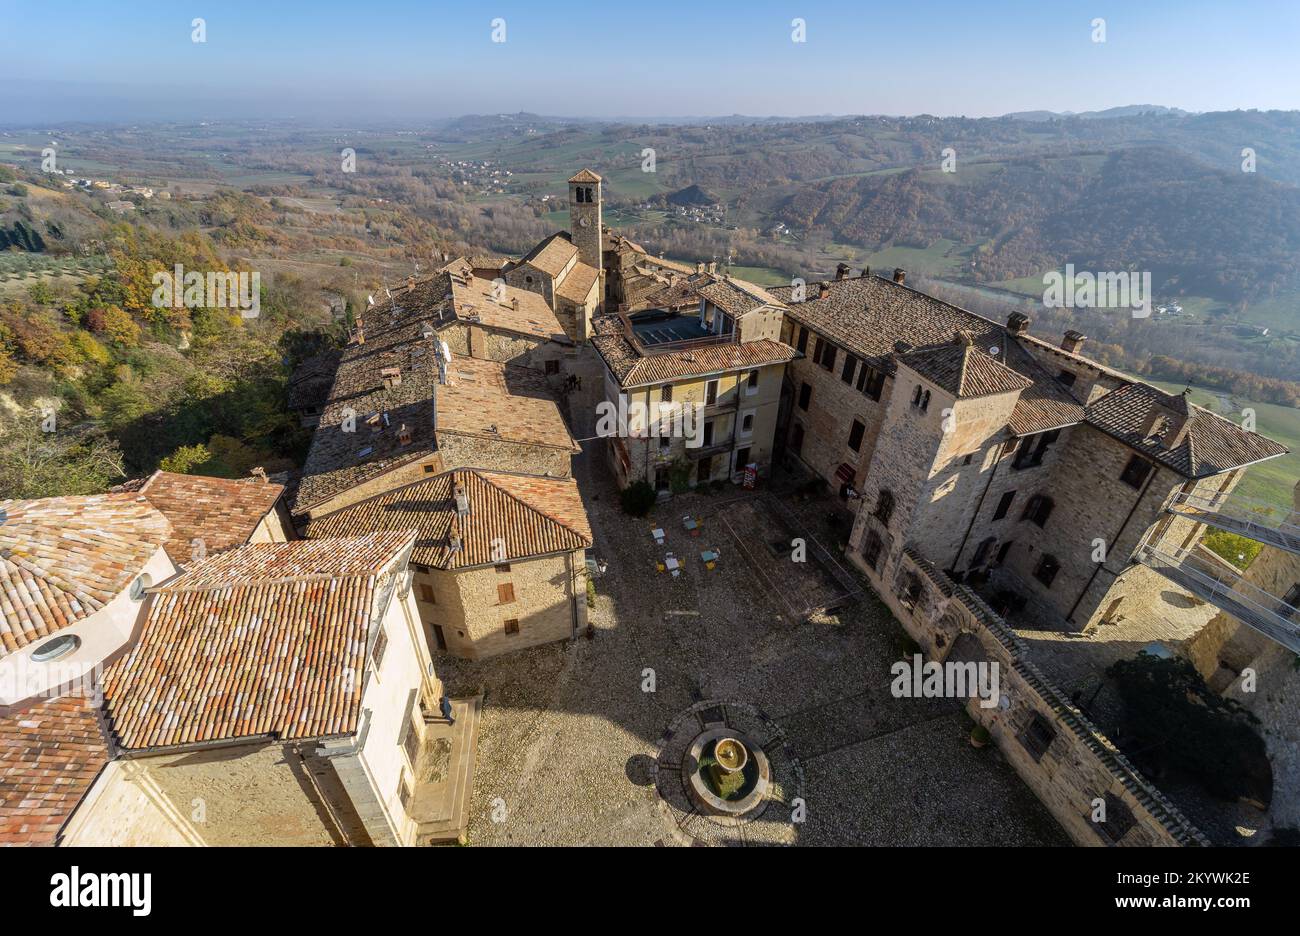 The medieval village and castle of Vigoleno in the Apennines in the province of Piacenza, Emilia Romagna, Northern Italy - aerial view Stock Photo